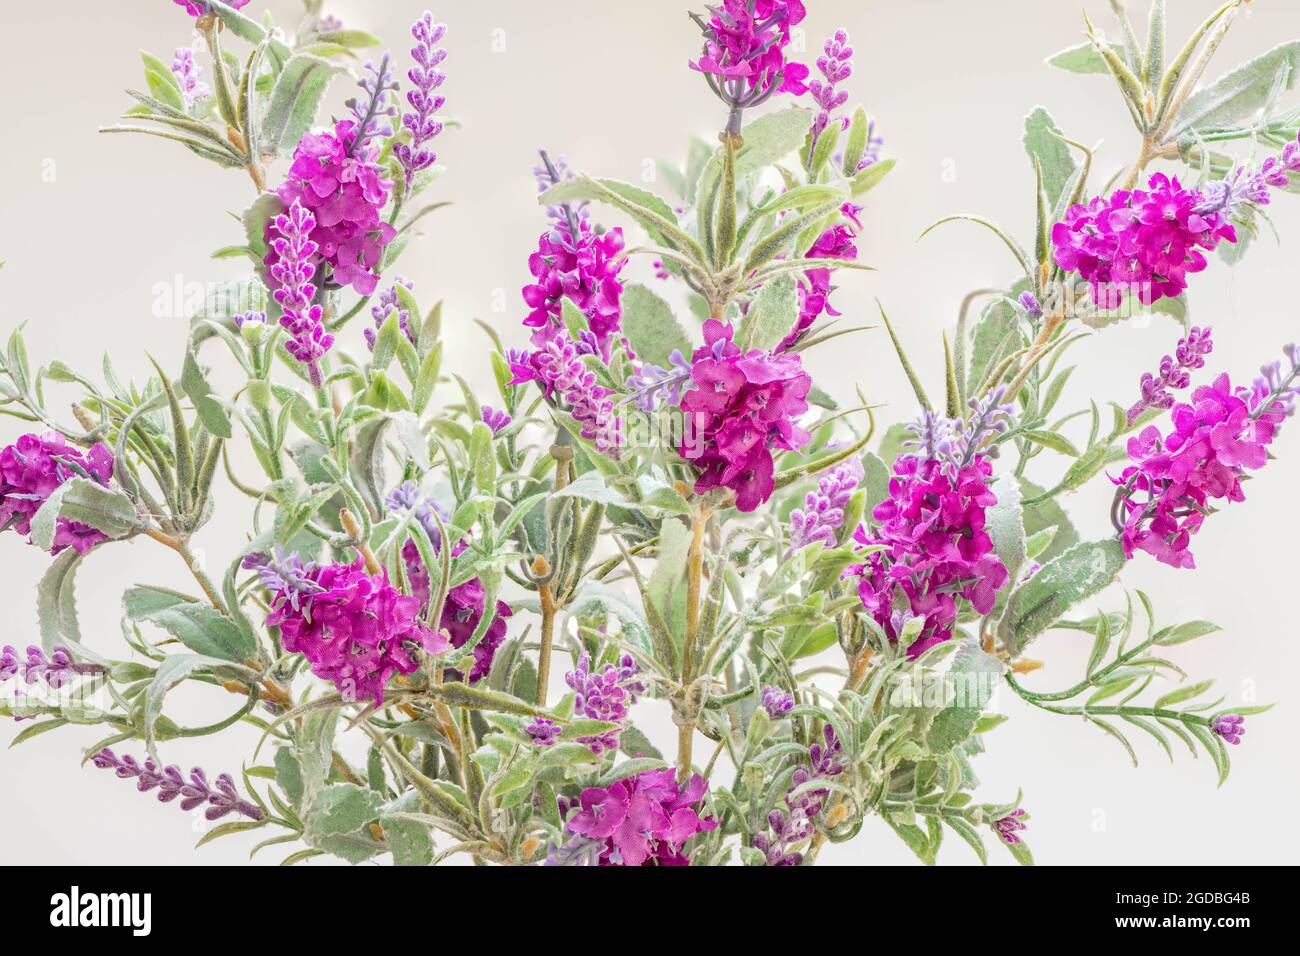 The Texas Ranger or Barometer Bush or sages bush with its distinctive lilac flower in this image made from cotton fabrics. Stock Photo